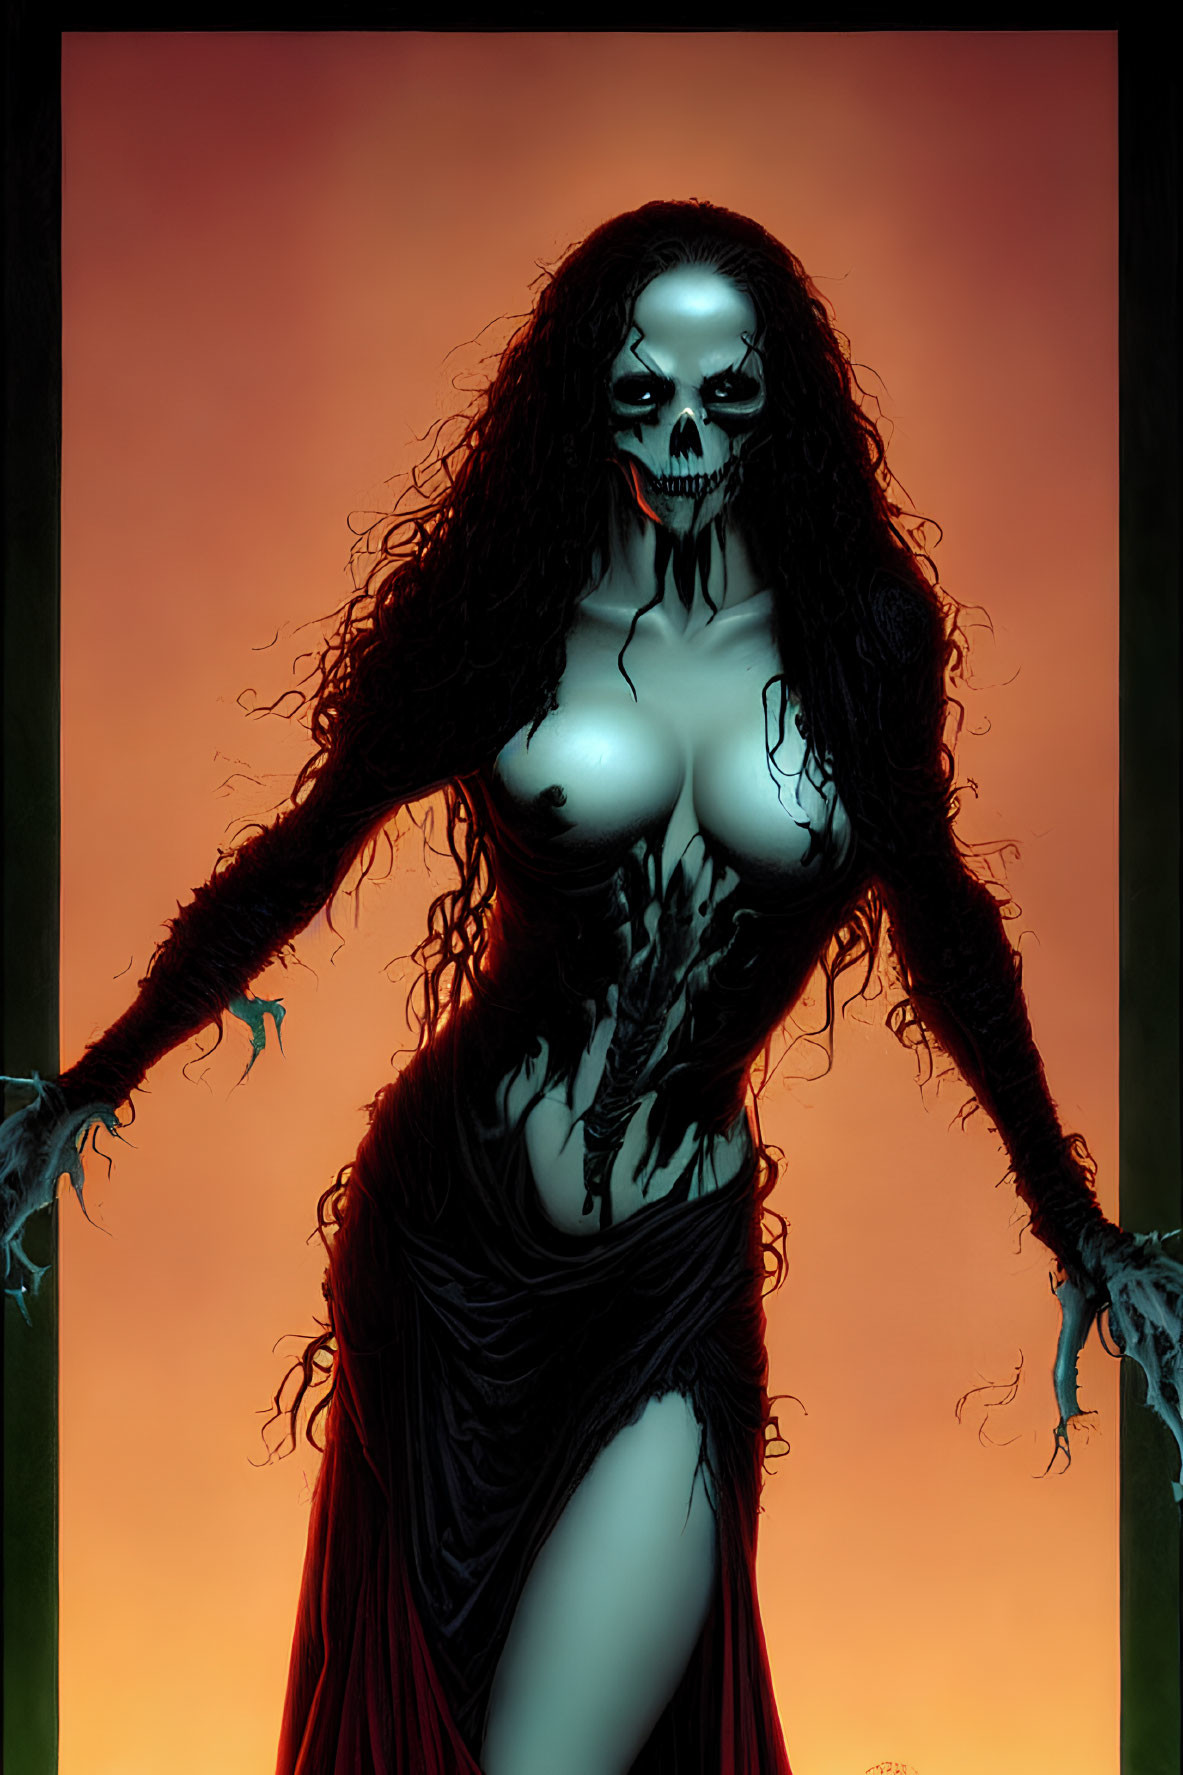 Sinister female figure with skeletal face and black hair in dark red garment